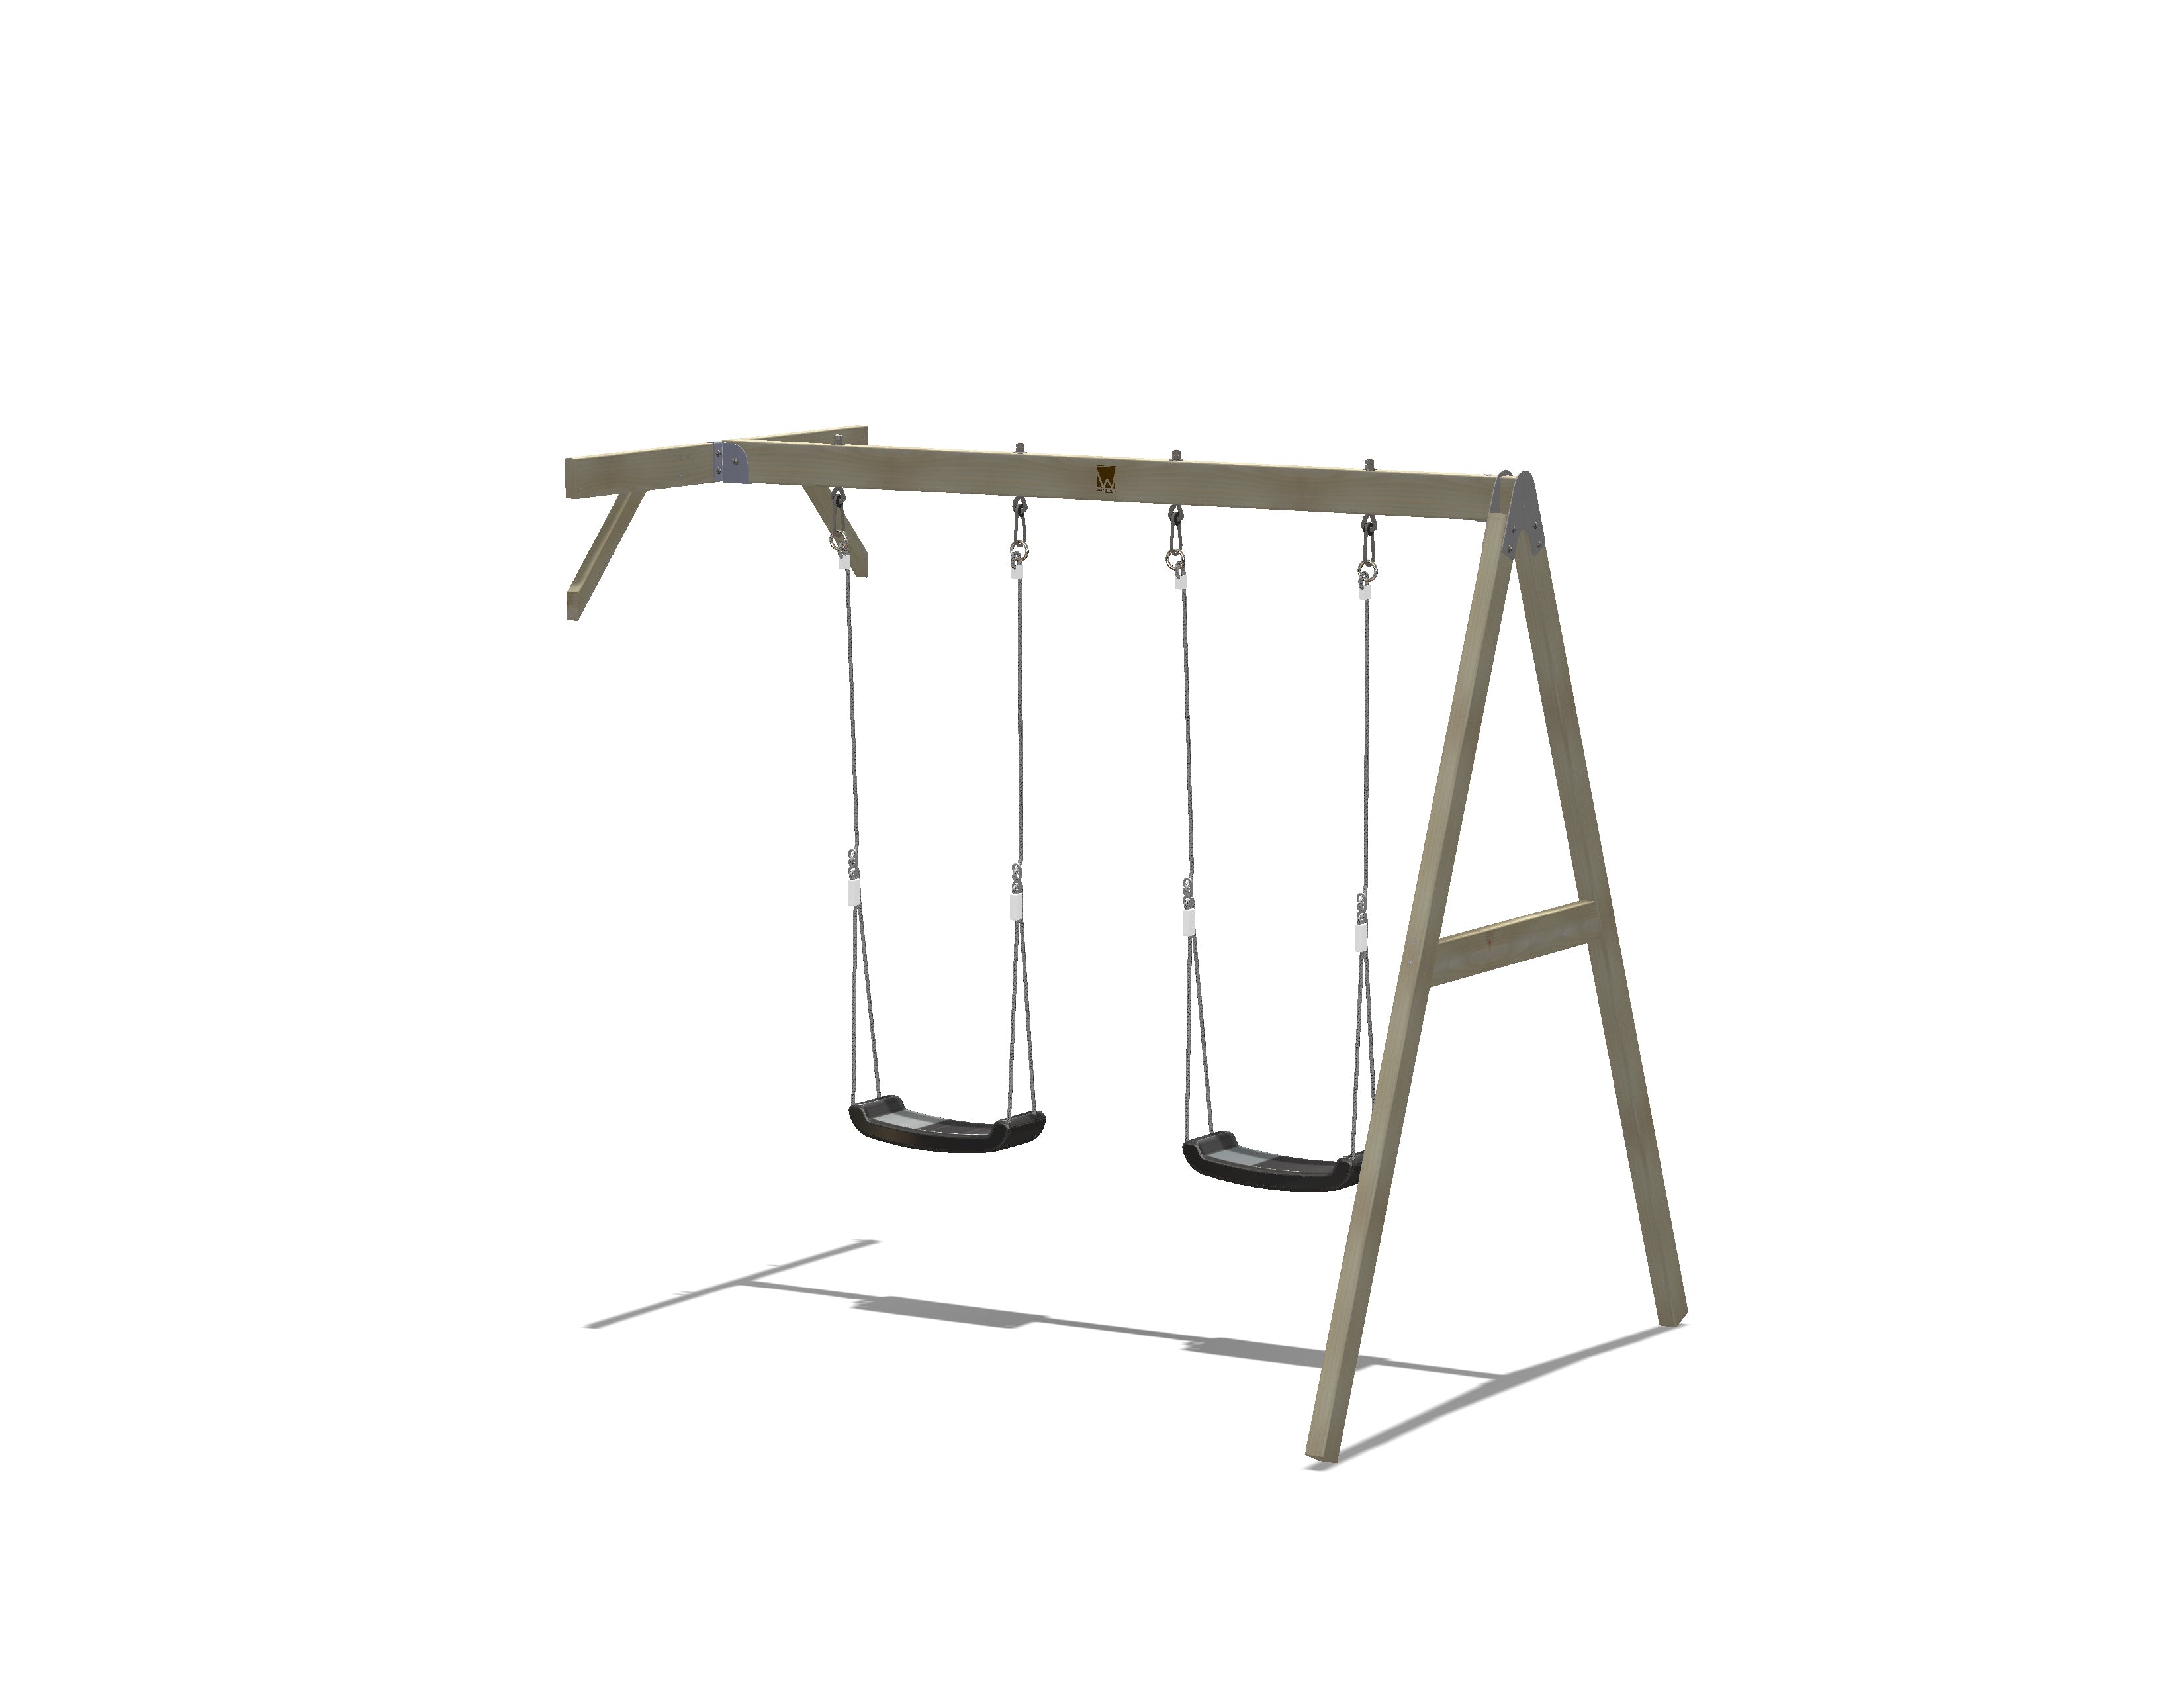 WE-729 Double Swing Attachment